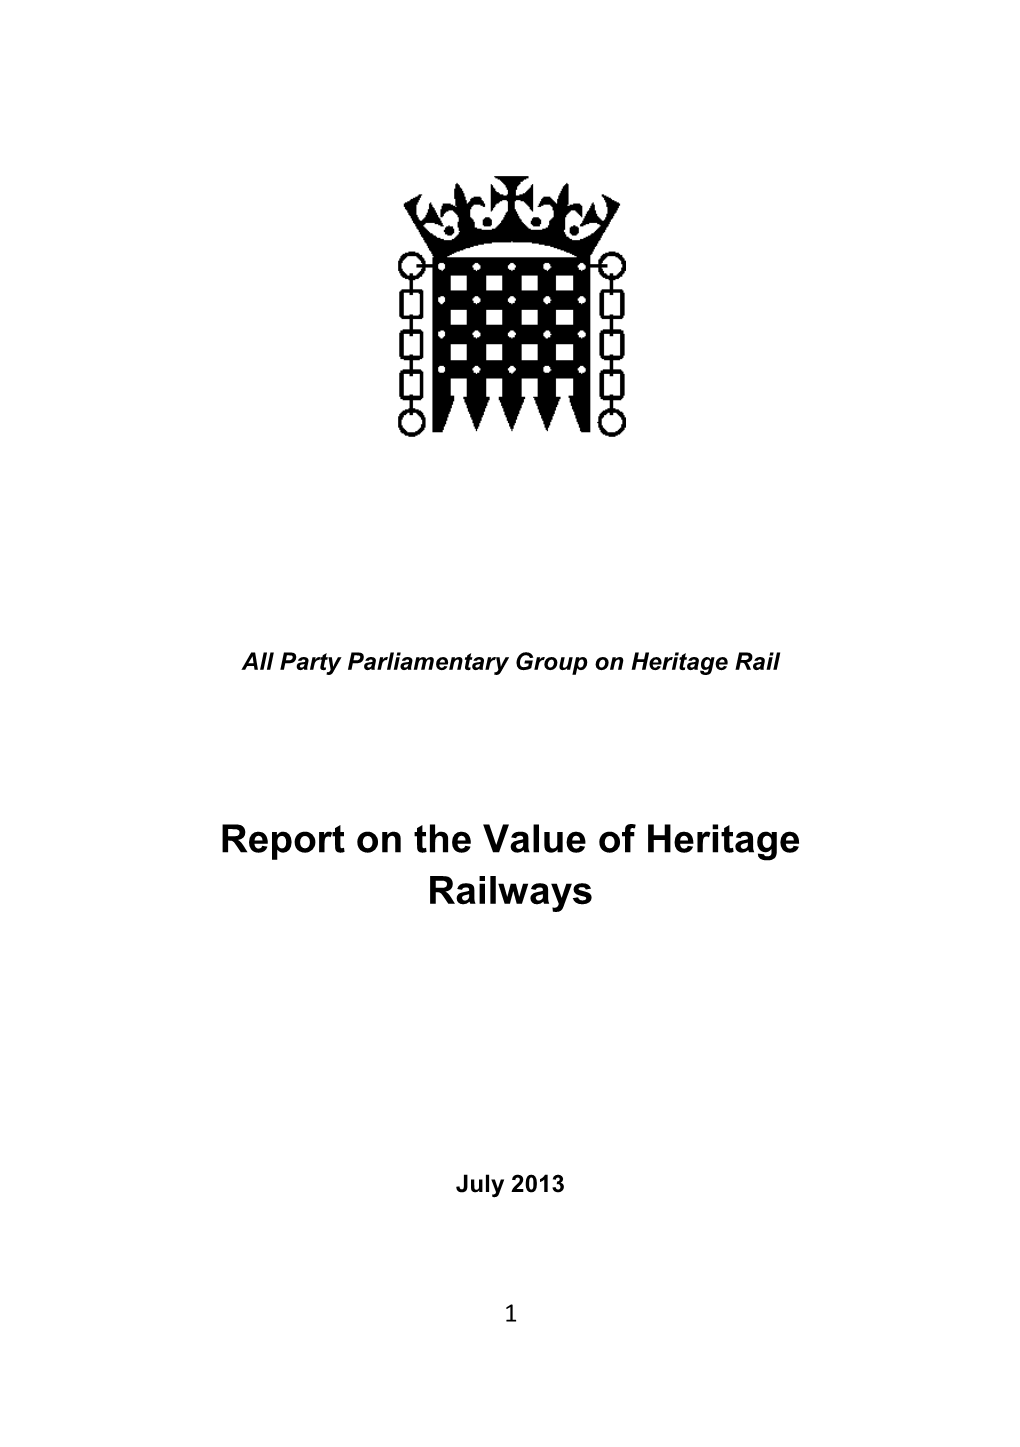 Report on the Value of Heritage Railways